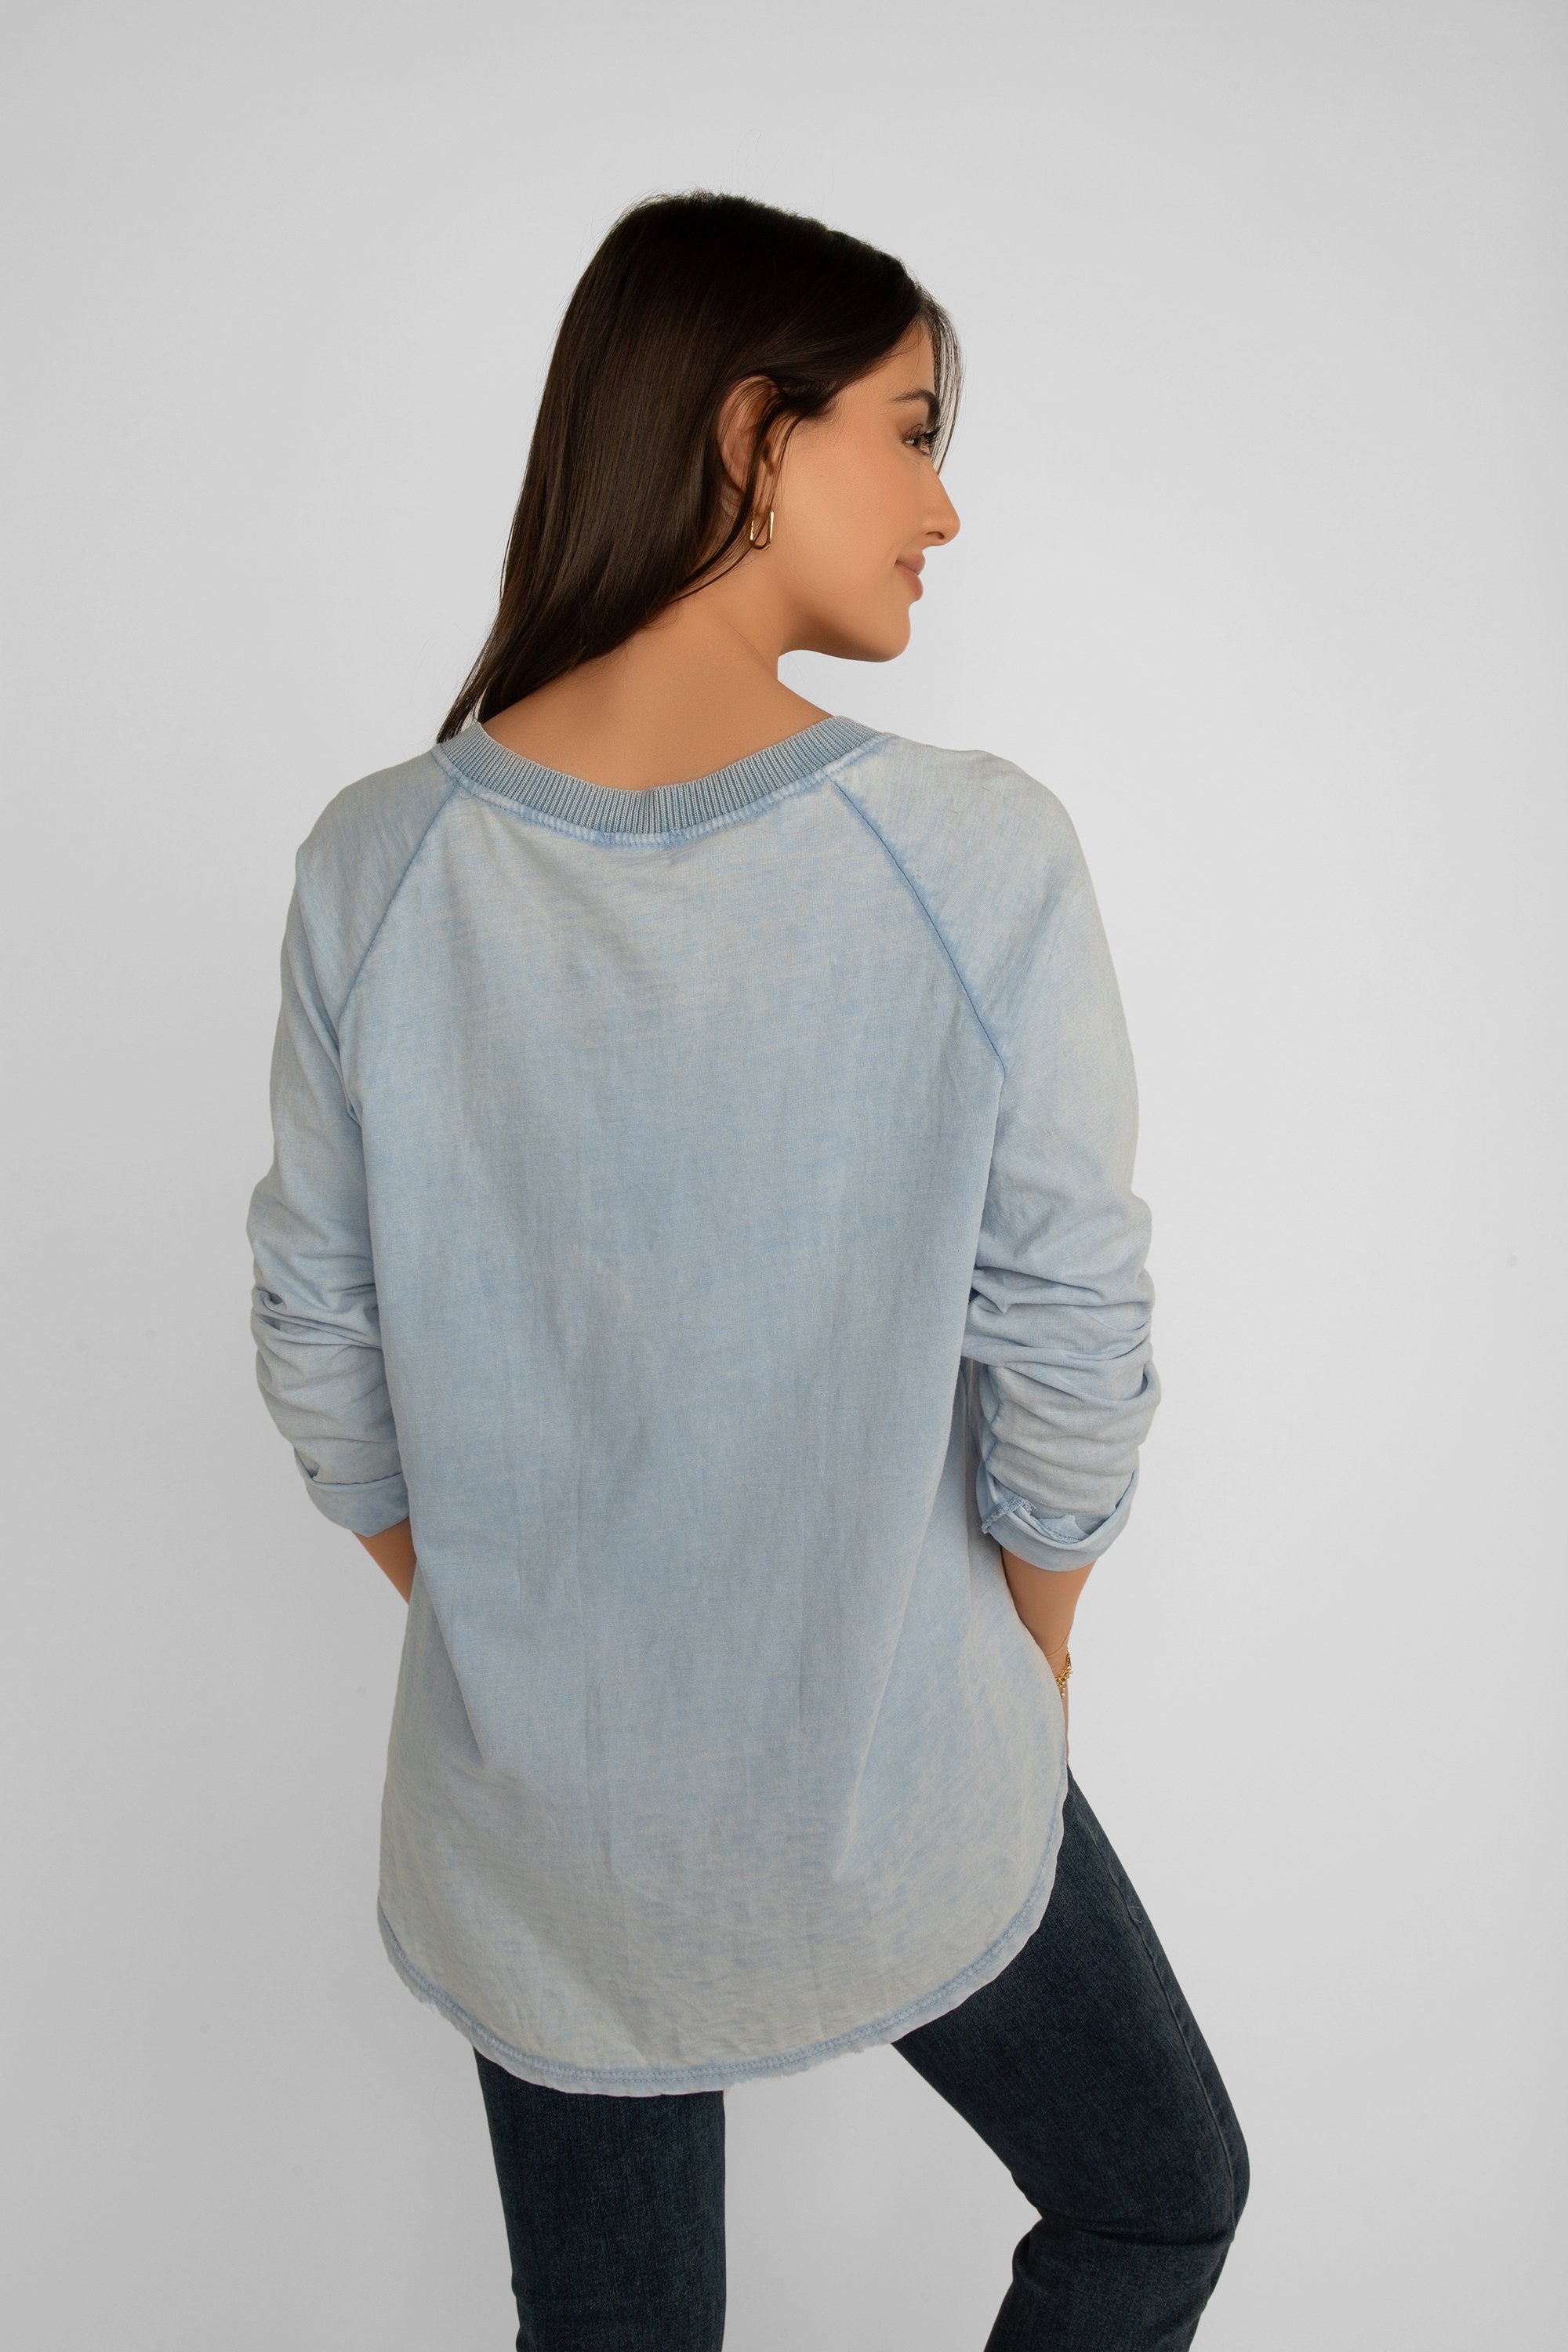 Back view of Elissia (JY3734) Women's Long Raglan Sleeve Garment Dye V-Neck Top with Button Patch Detail on left hip, and a high low hem in Baby Blue